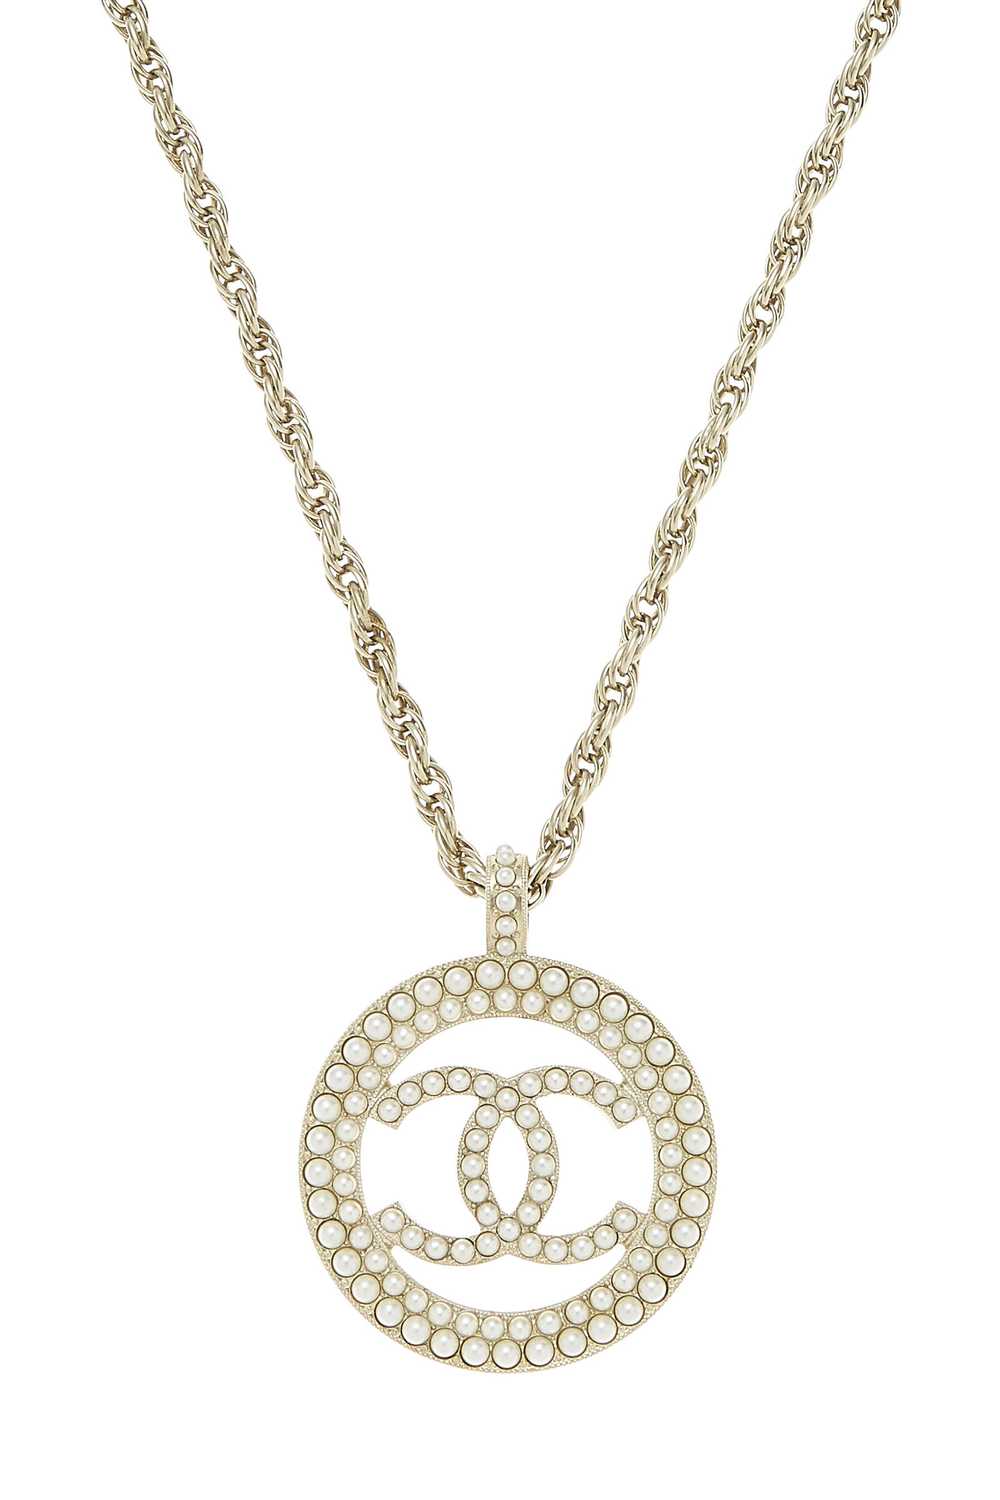 Gold & White Faux Pearl 'CC' Necklace - image 2